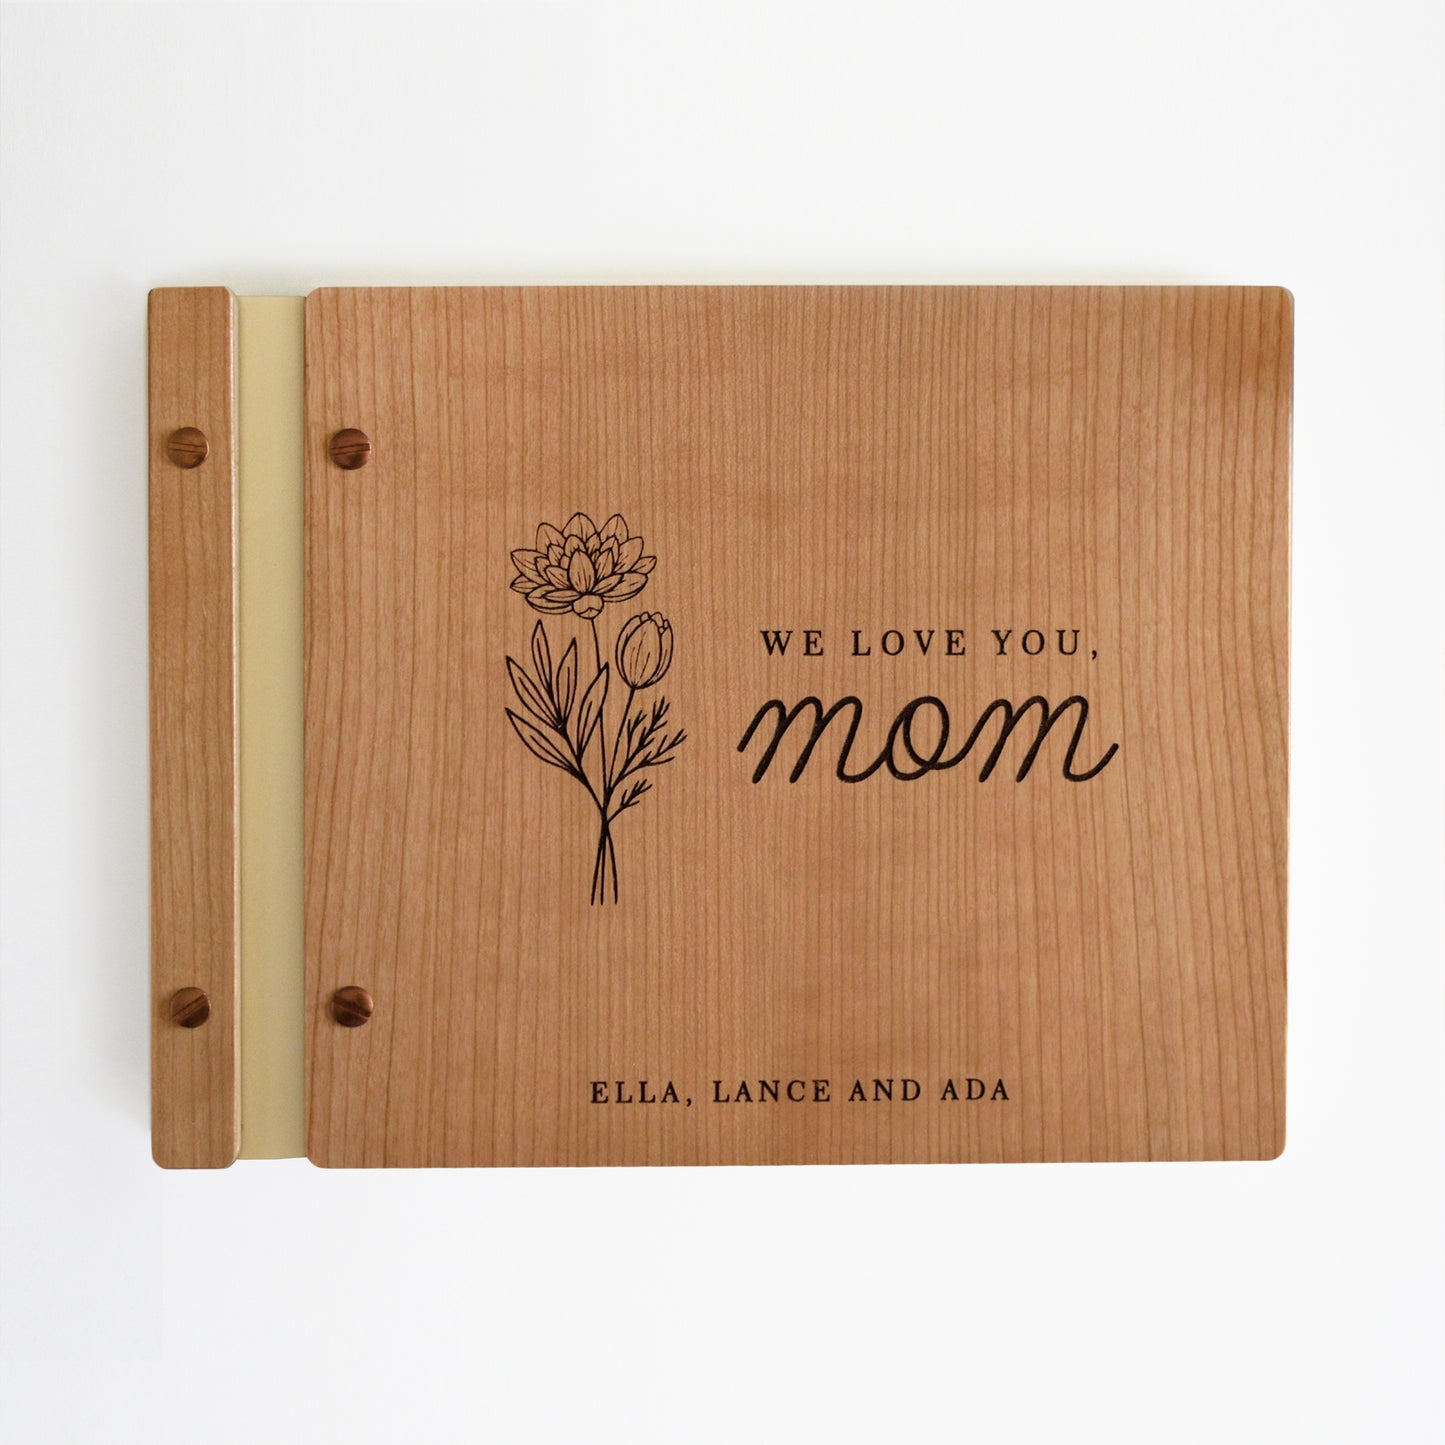 An 8.5x11" sized guest book stands on a table with a white background. The graduation guest book is made from cherry wood, ivory binding, and copper hardware. This is the perfect gift for Mom this Mother's Day!